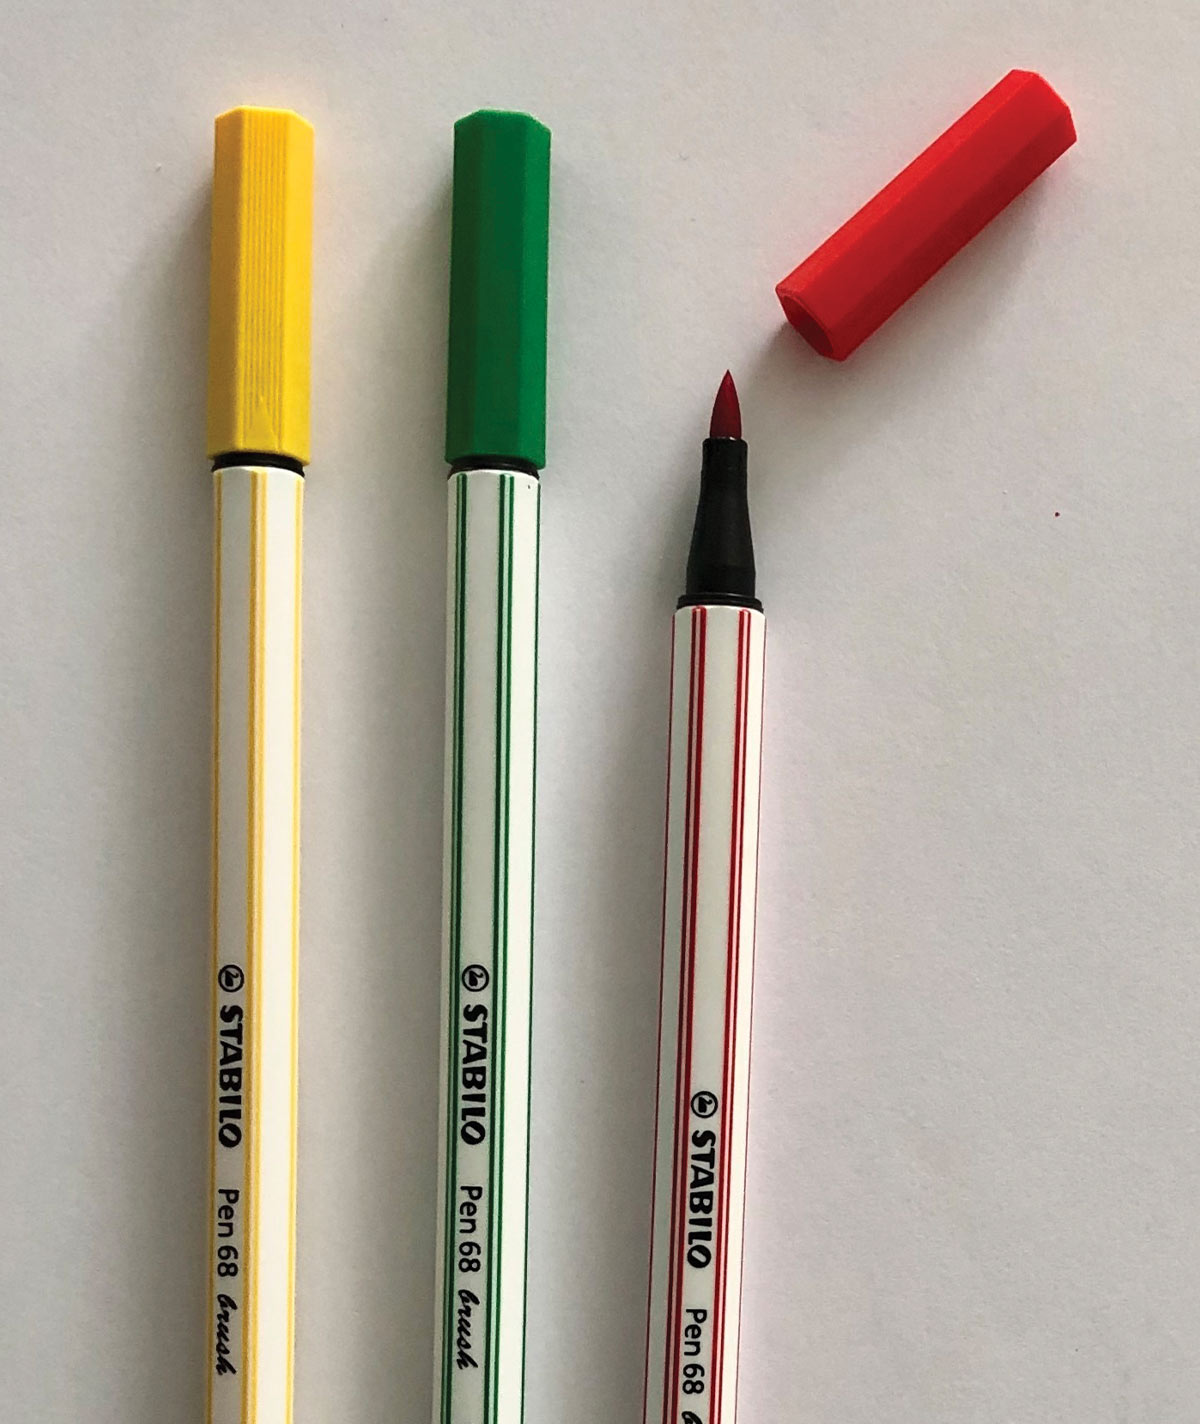 STABILO Pens in yellow, green, and red